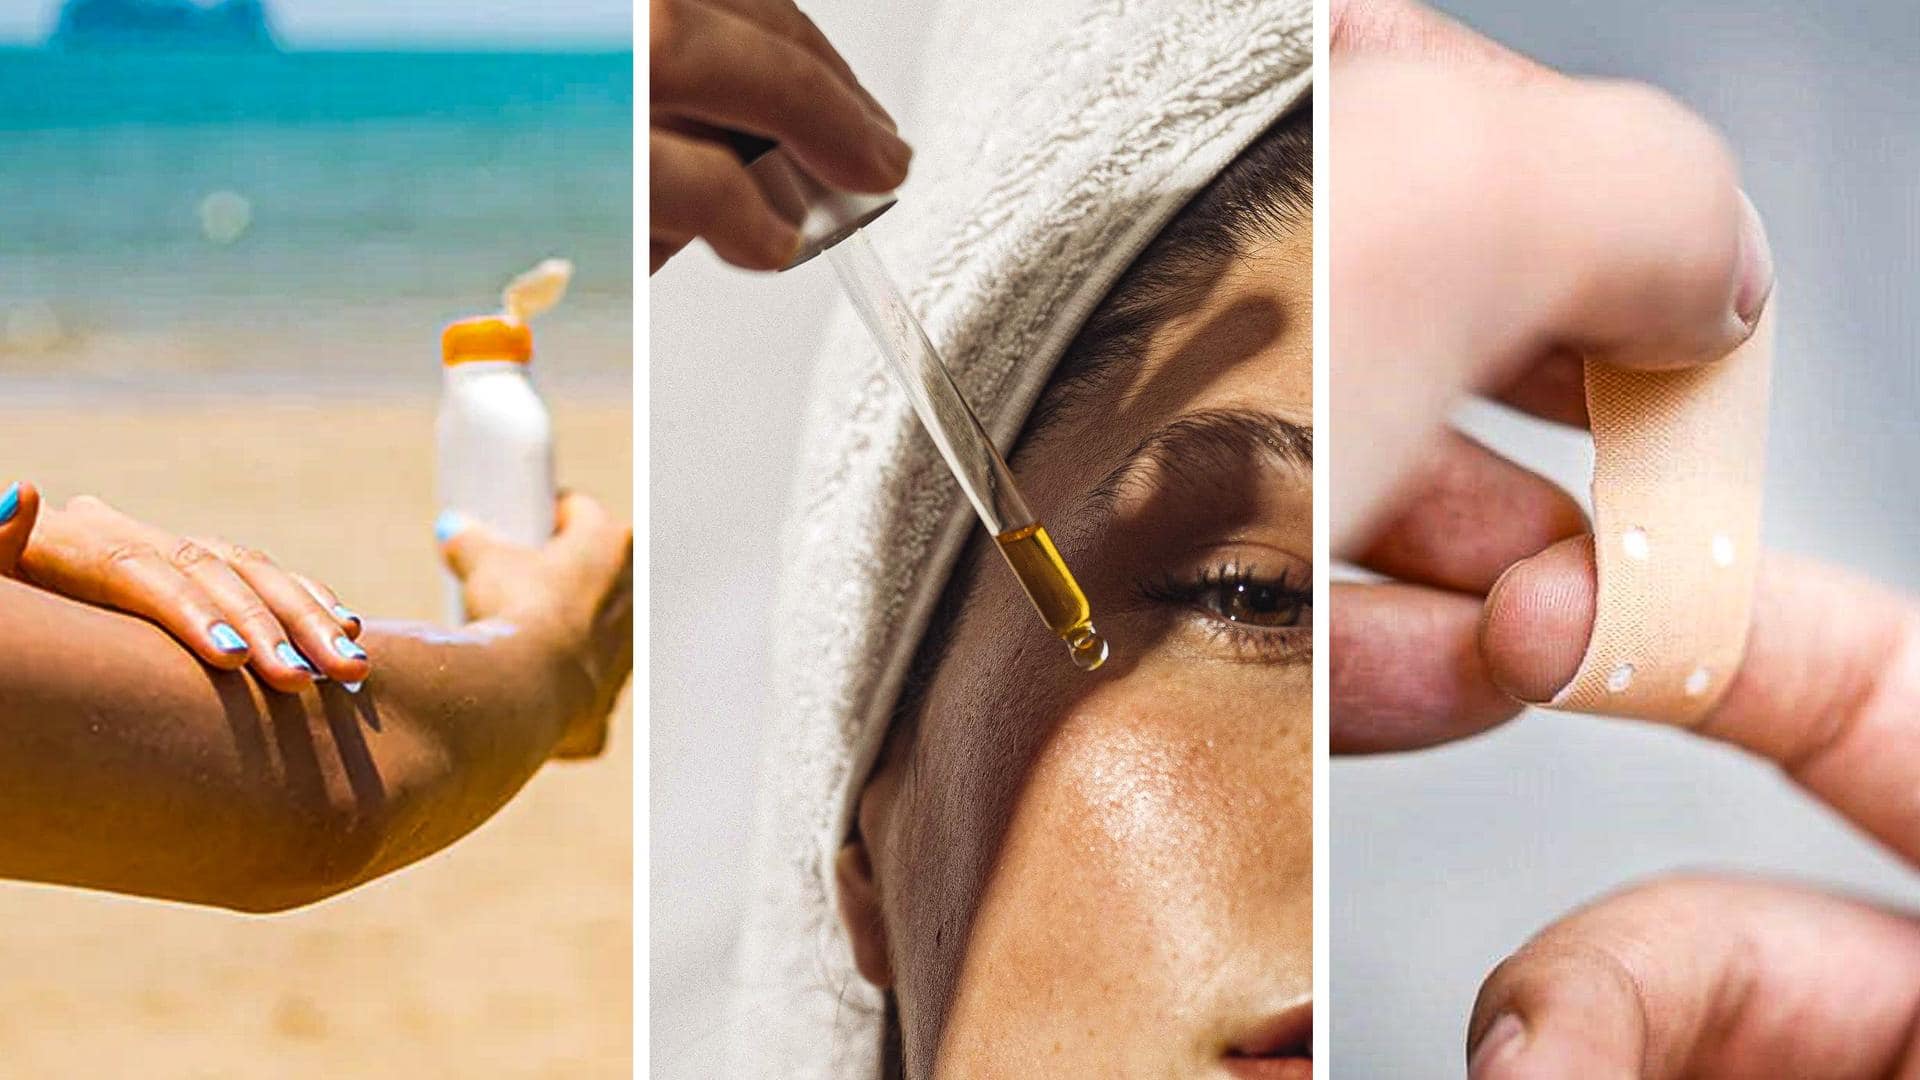 Follow these pre-Holi skincare tips before playing with colors